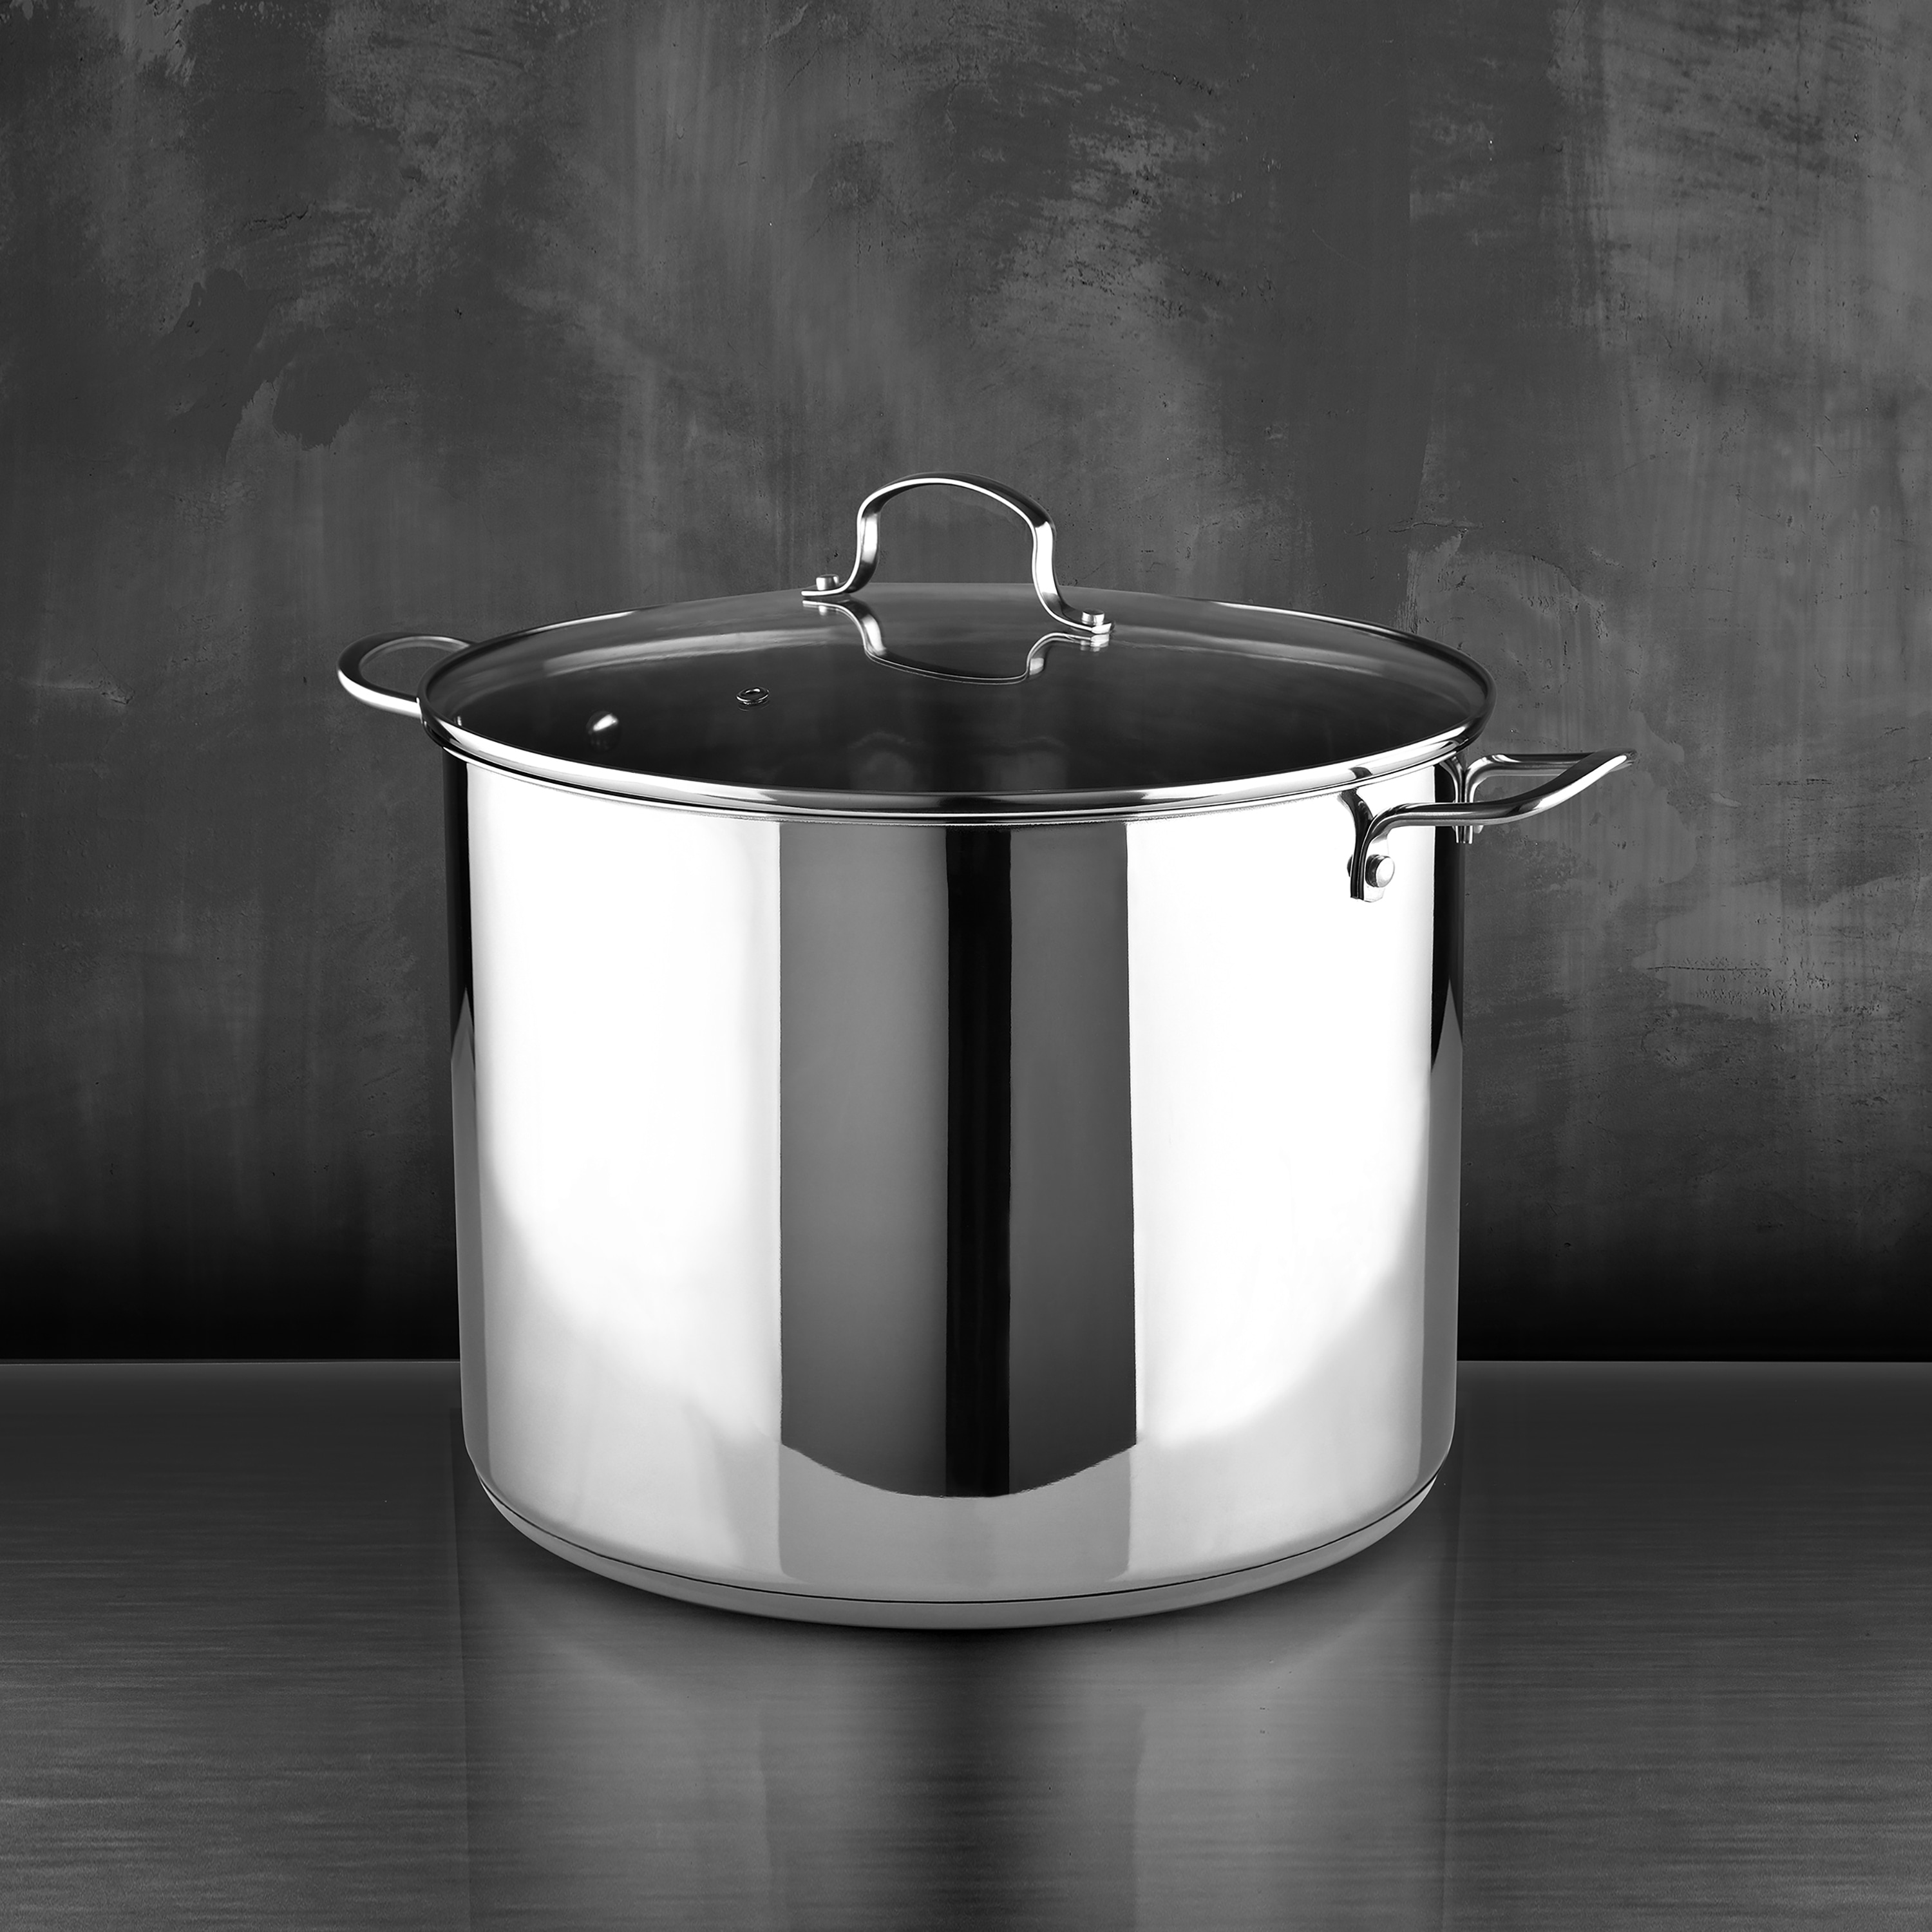 https://ak1.ostkcdn.com/images/products/is/images/direct/6204c0df35ee2fb58af8b011d099a525c484ce06/Bergner-Essentials-BGUS10125STS-Stainless-Steel-Stock-Pot-with-Tempered-Glass-Lid-12-Quart-Pot.jpg